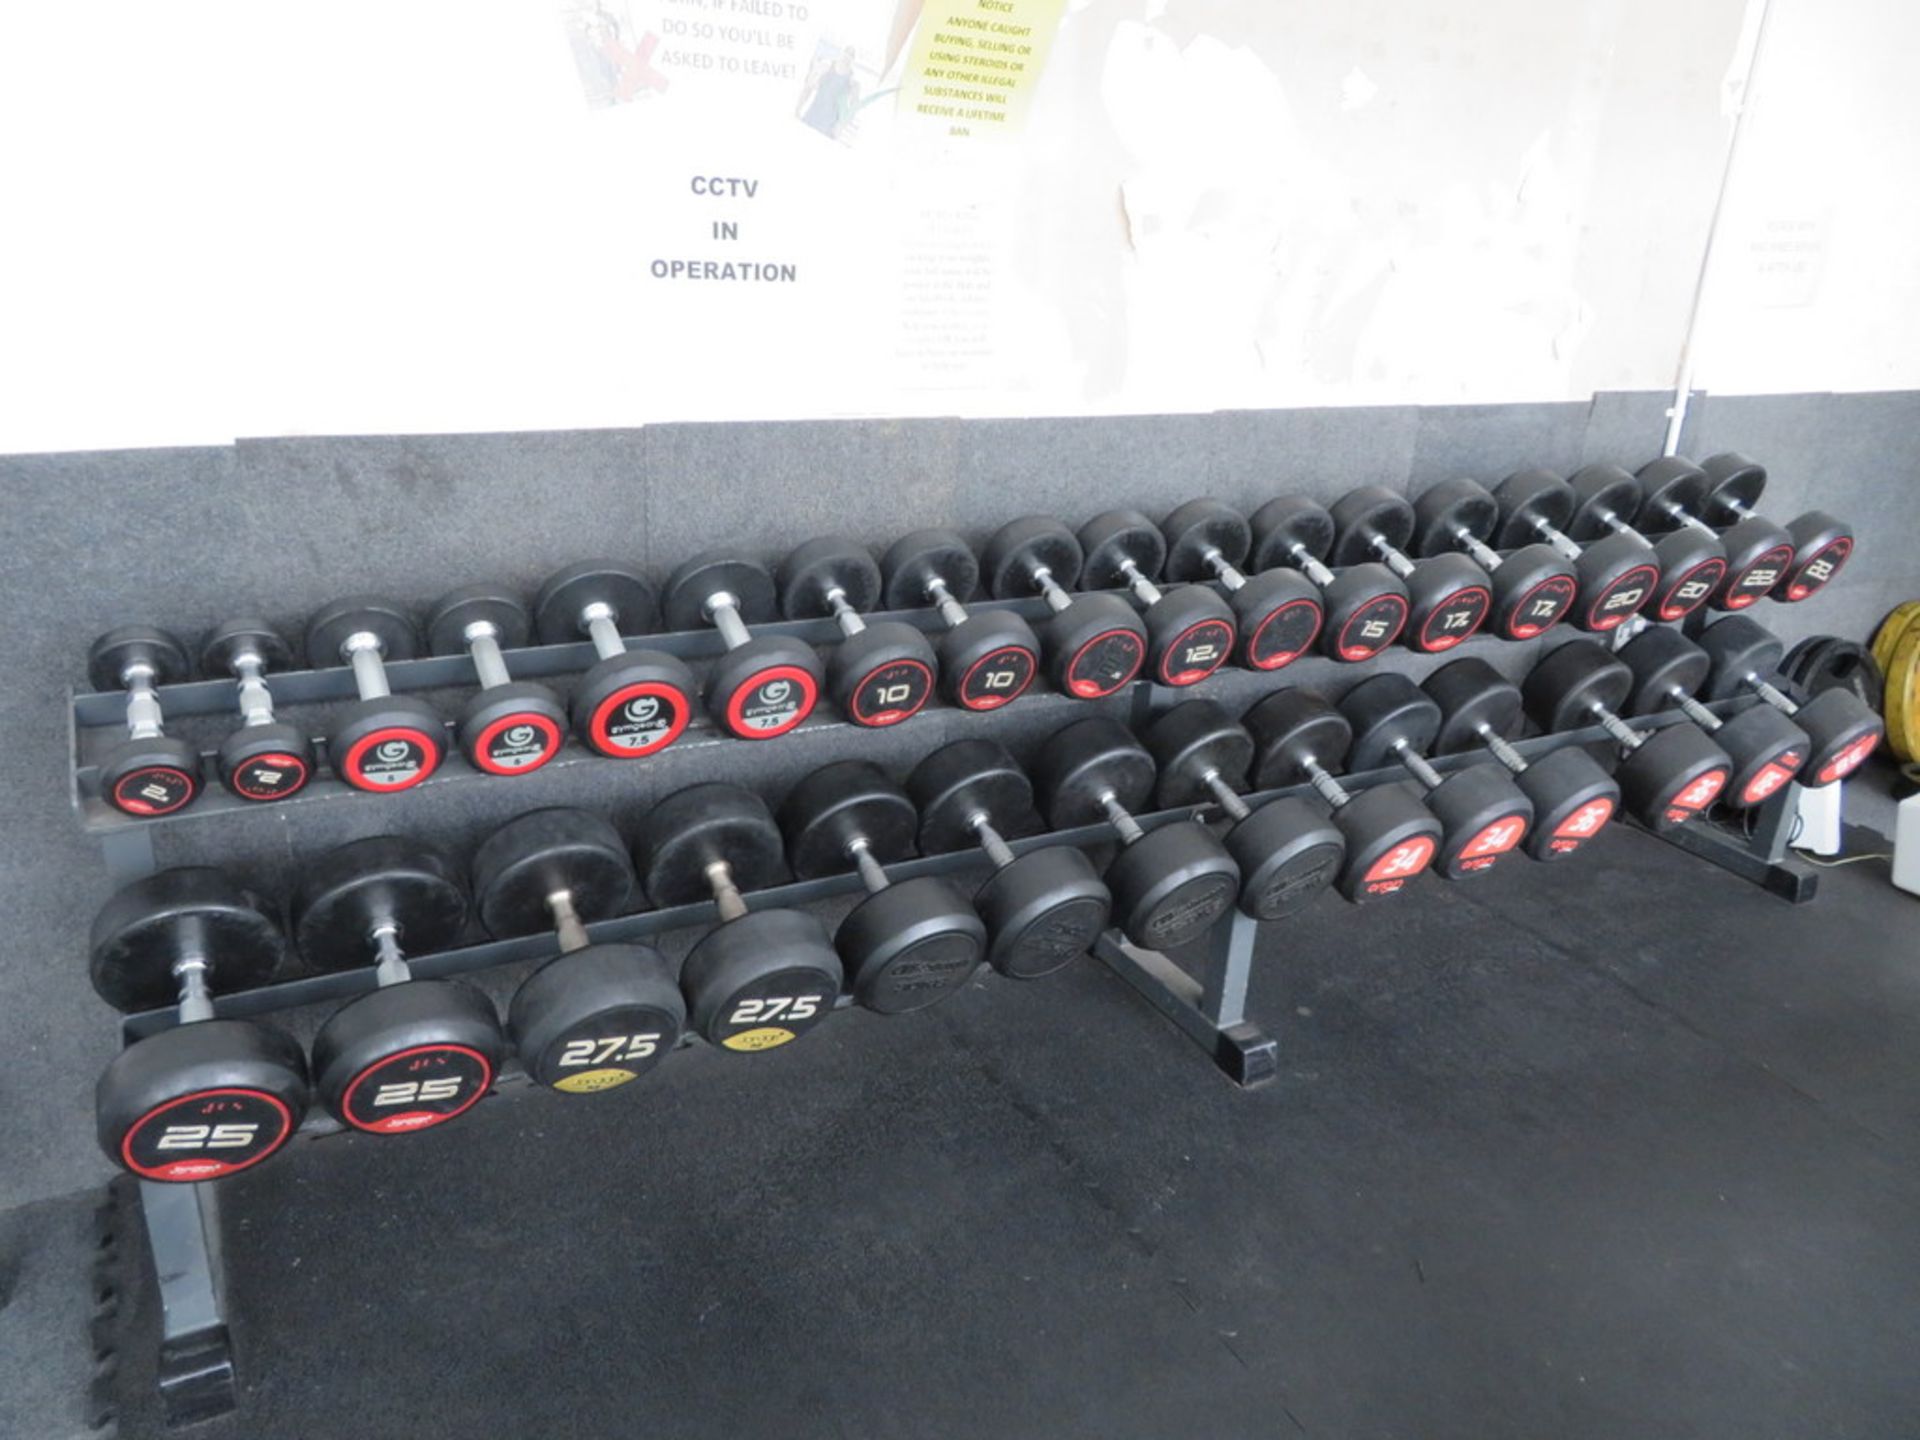 16 X PAIRS OF DUMBELLS AND TWO TIER RACK